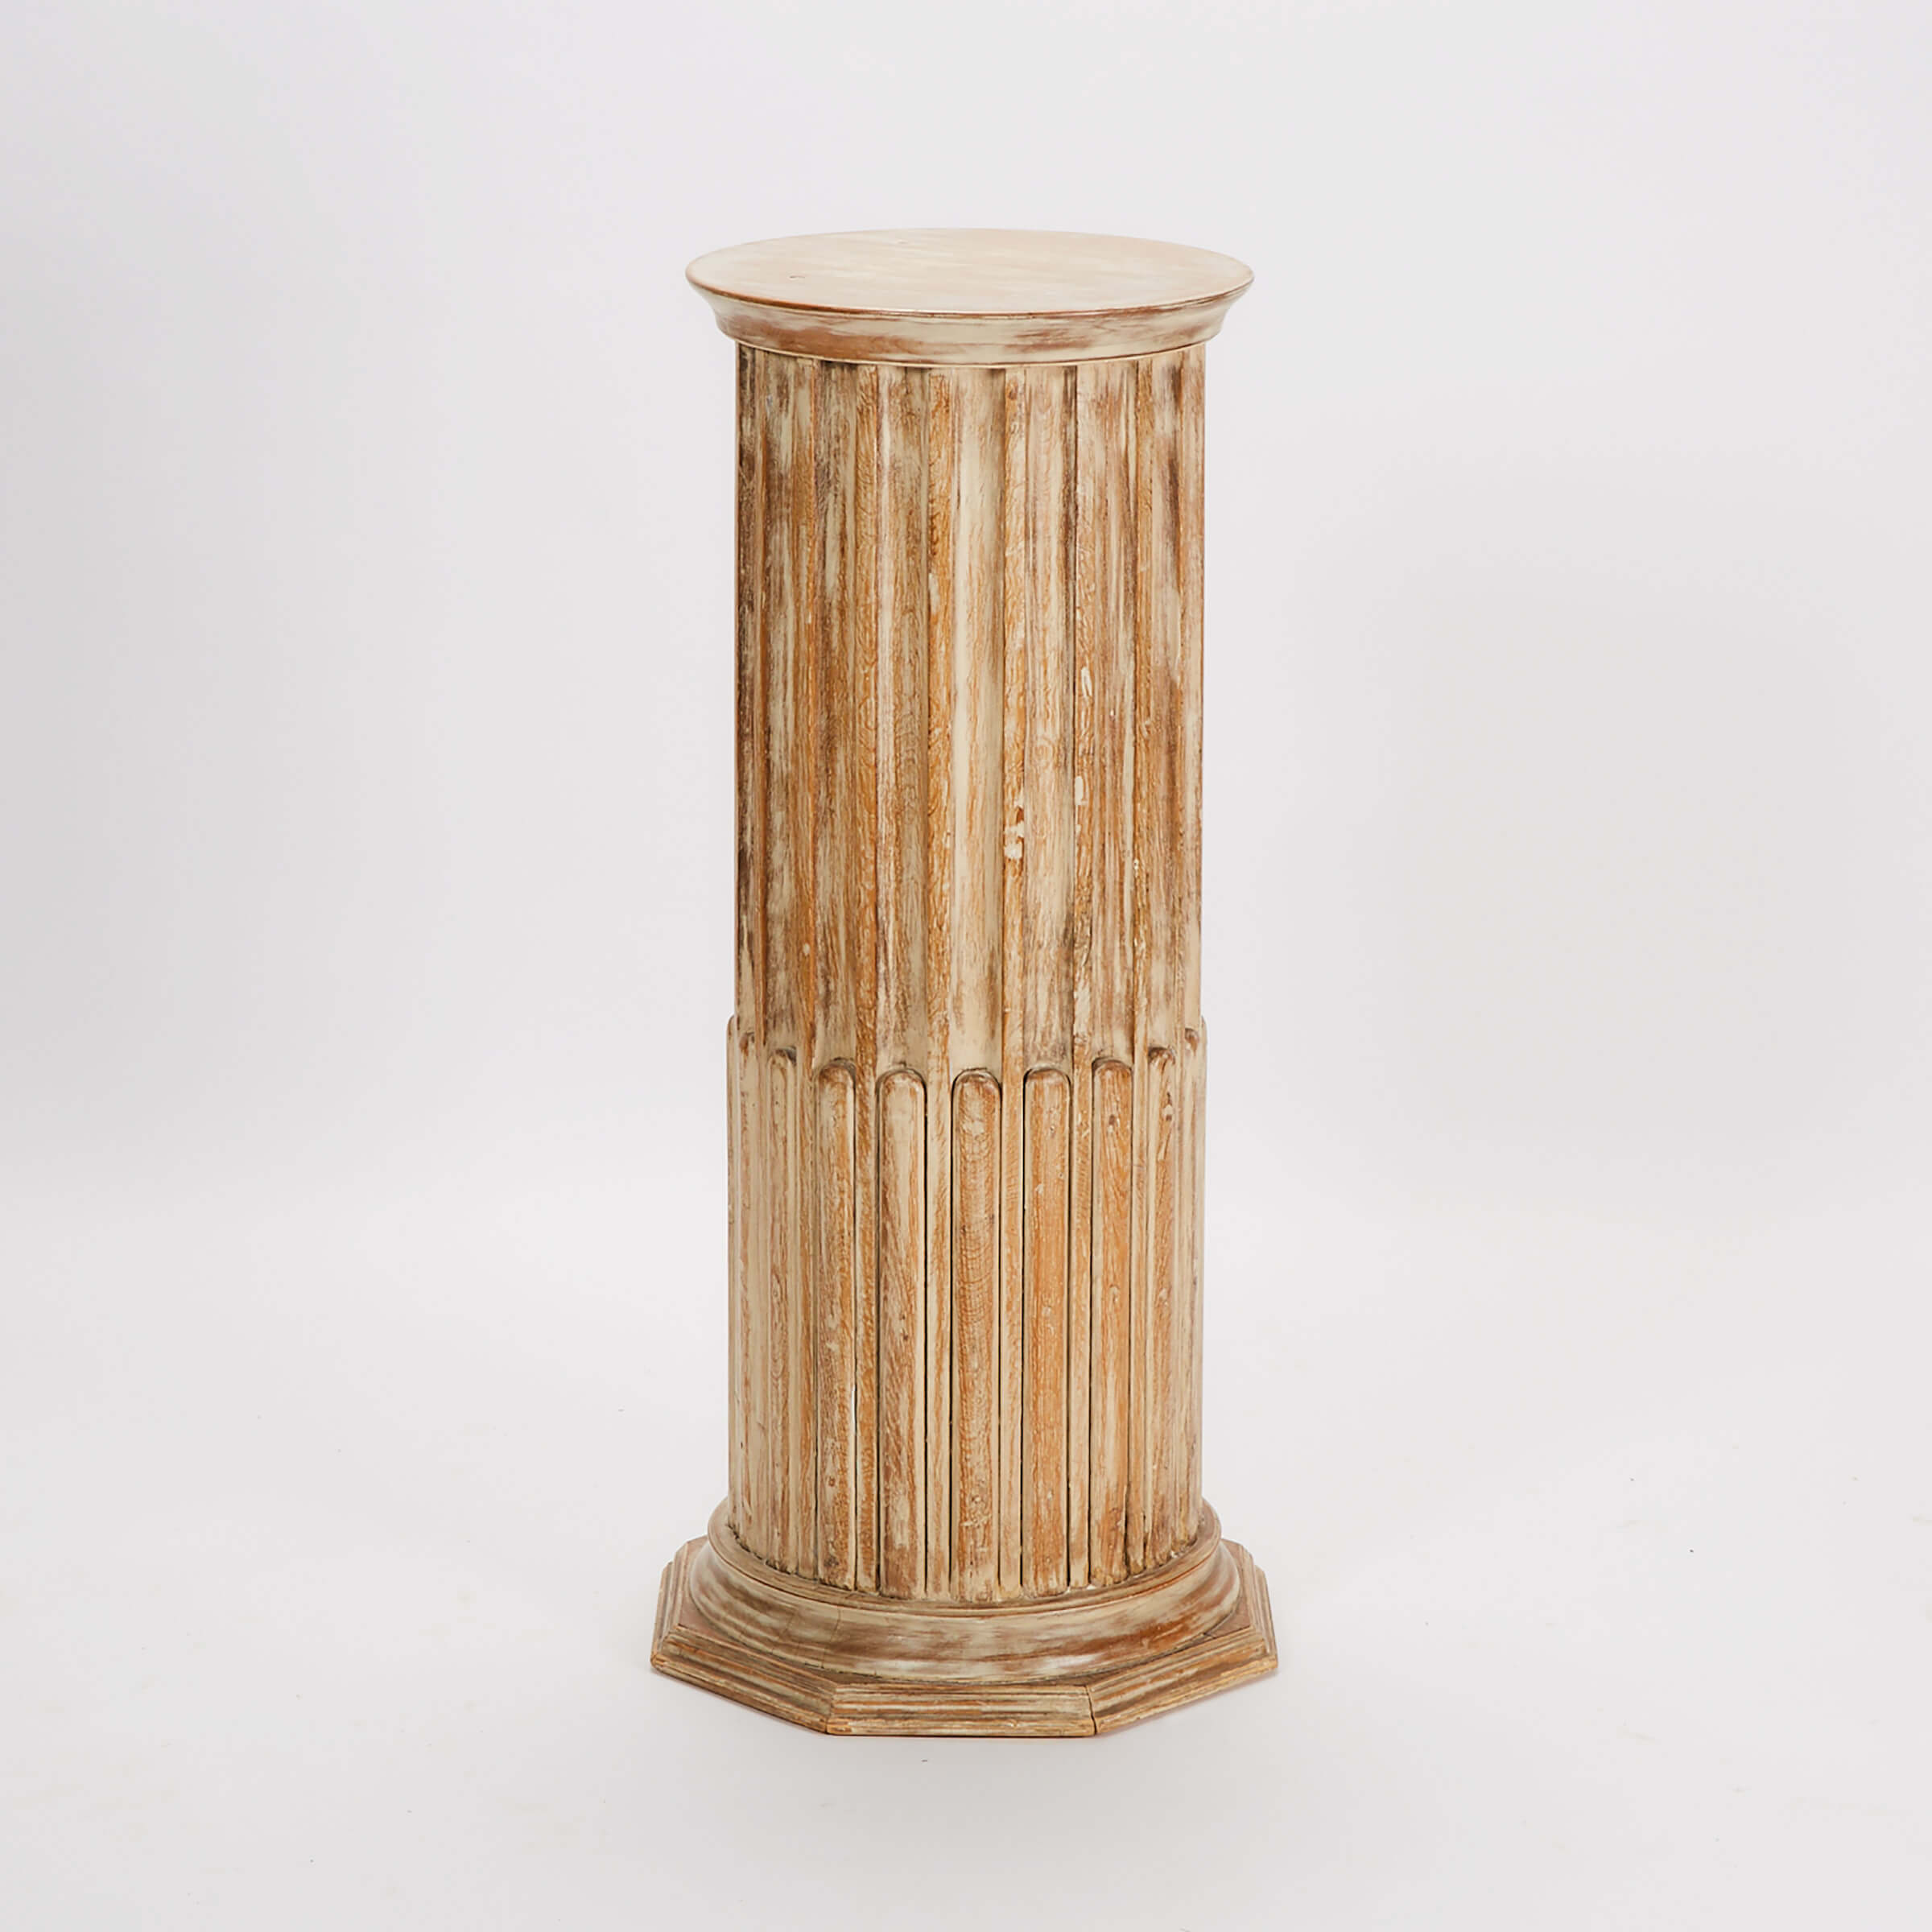 Stop-Fluted Painted Wood Column Form Pedestal, mid 20th century